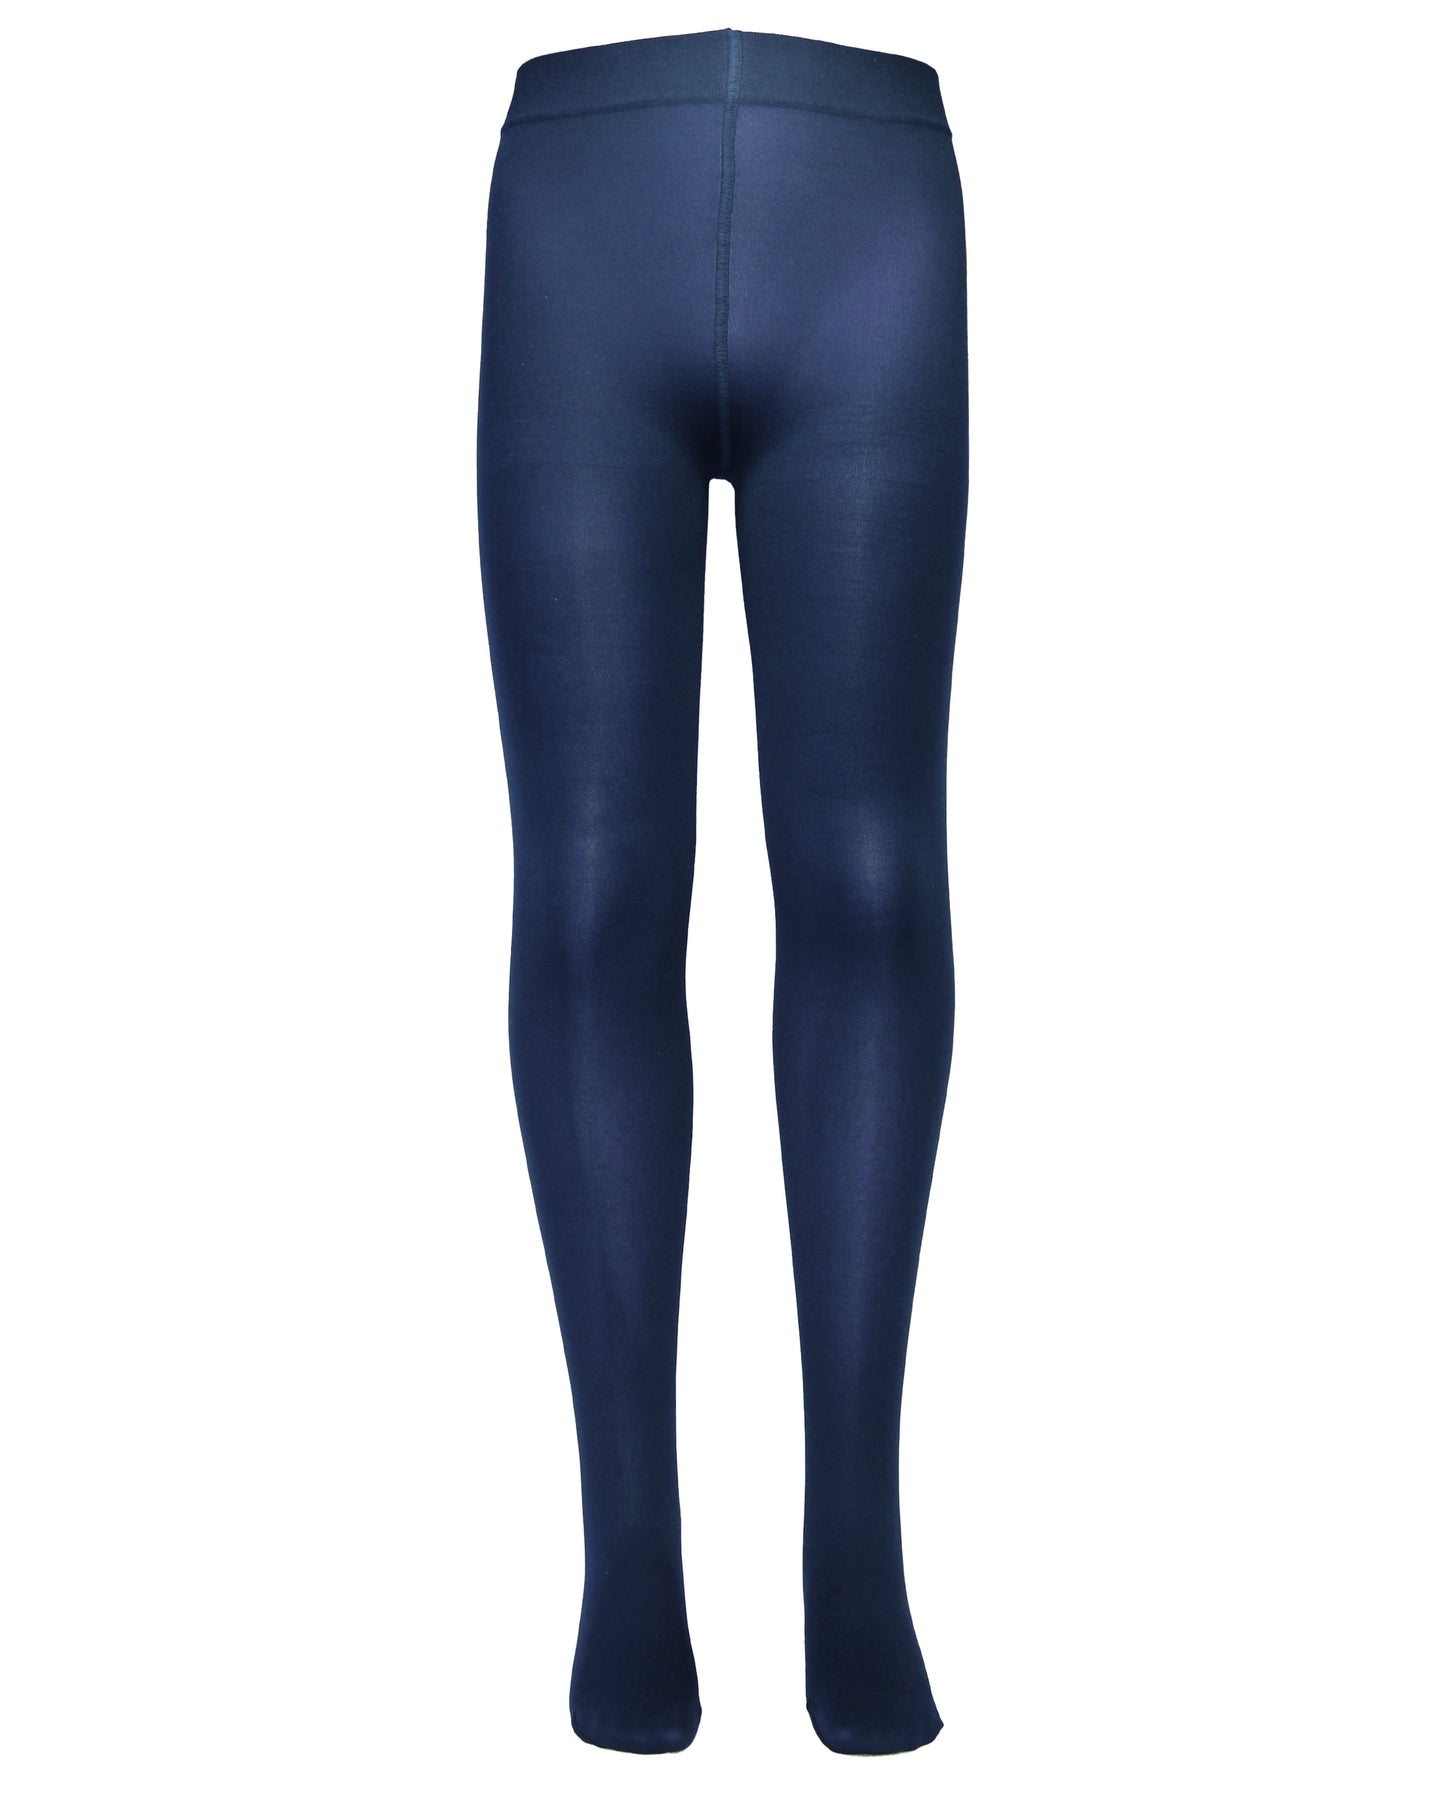 Omsa MiniVelour 40 Tights - Navy blue soft and matte opaque plain kid's tights with flat seams, deep waistband and reinforced toes.